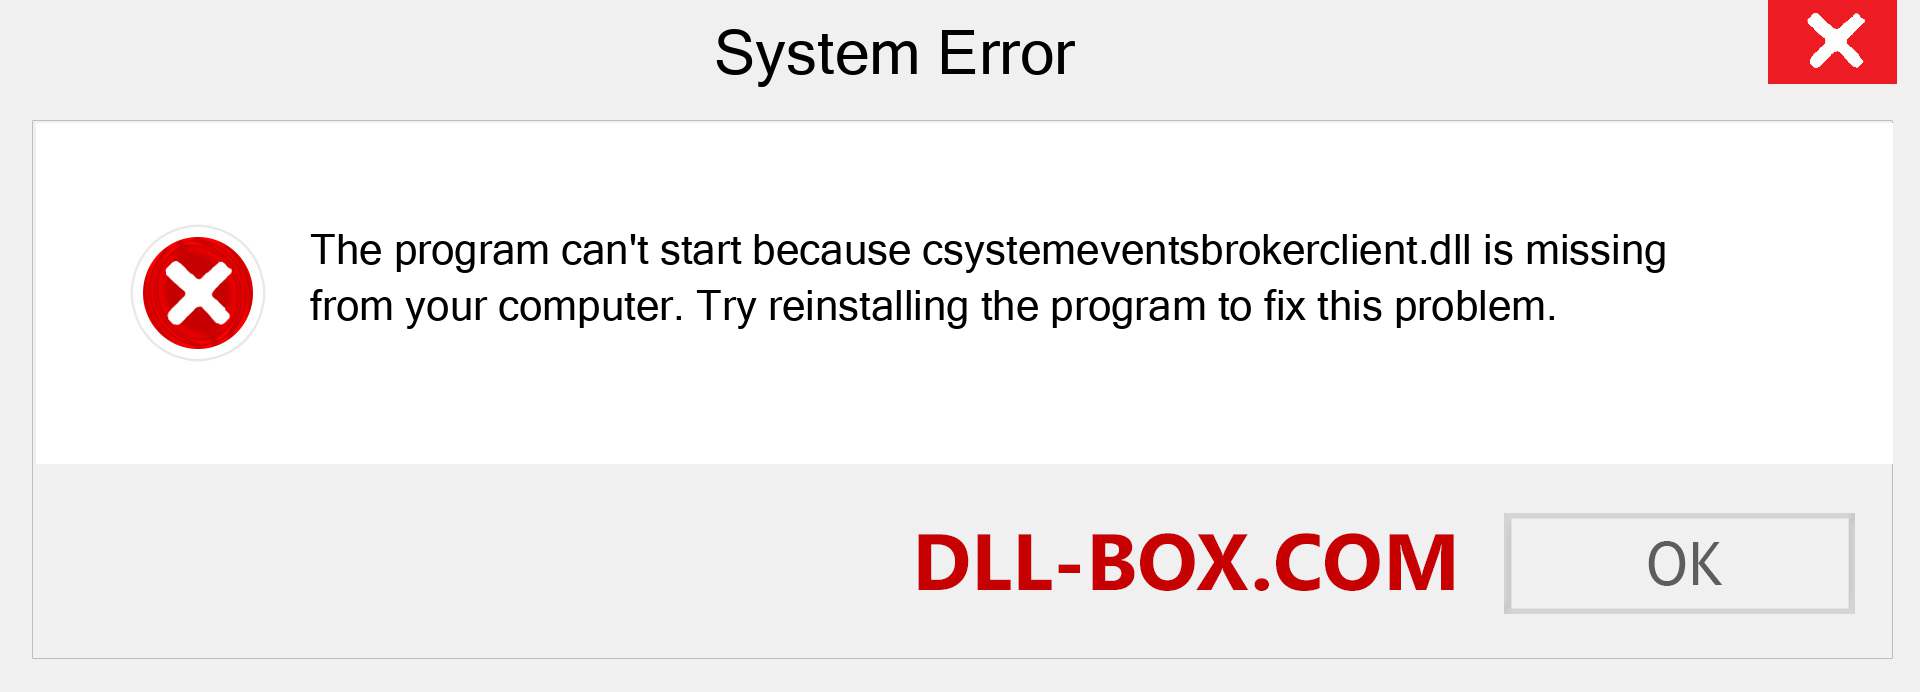  csystemeventsbrokerclient.dll file is missing?. Download for Windows 7, 8, 10 - Fix  csystemeventsbrokerclient dll Missing Error on Windows, photos, images